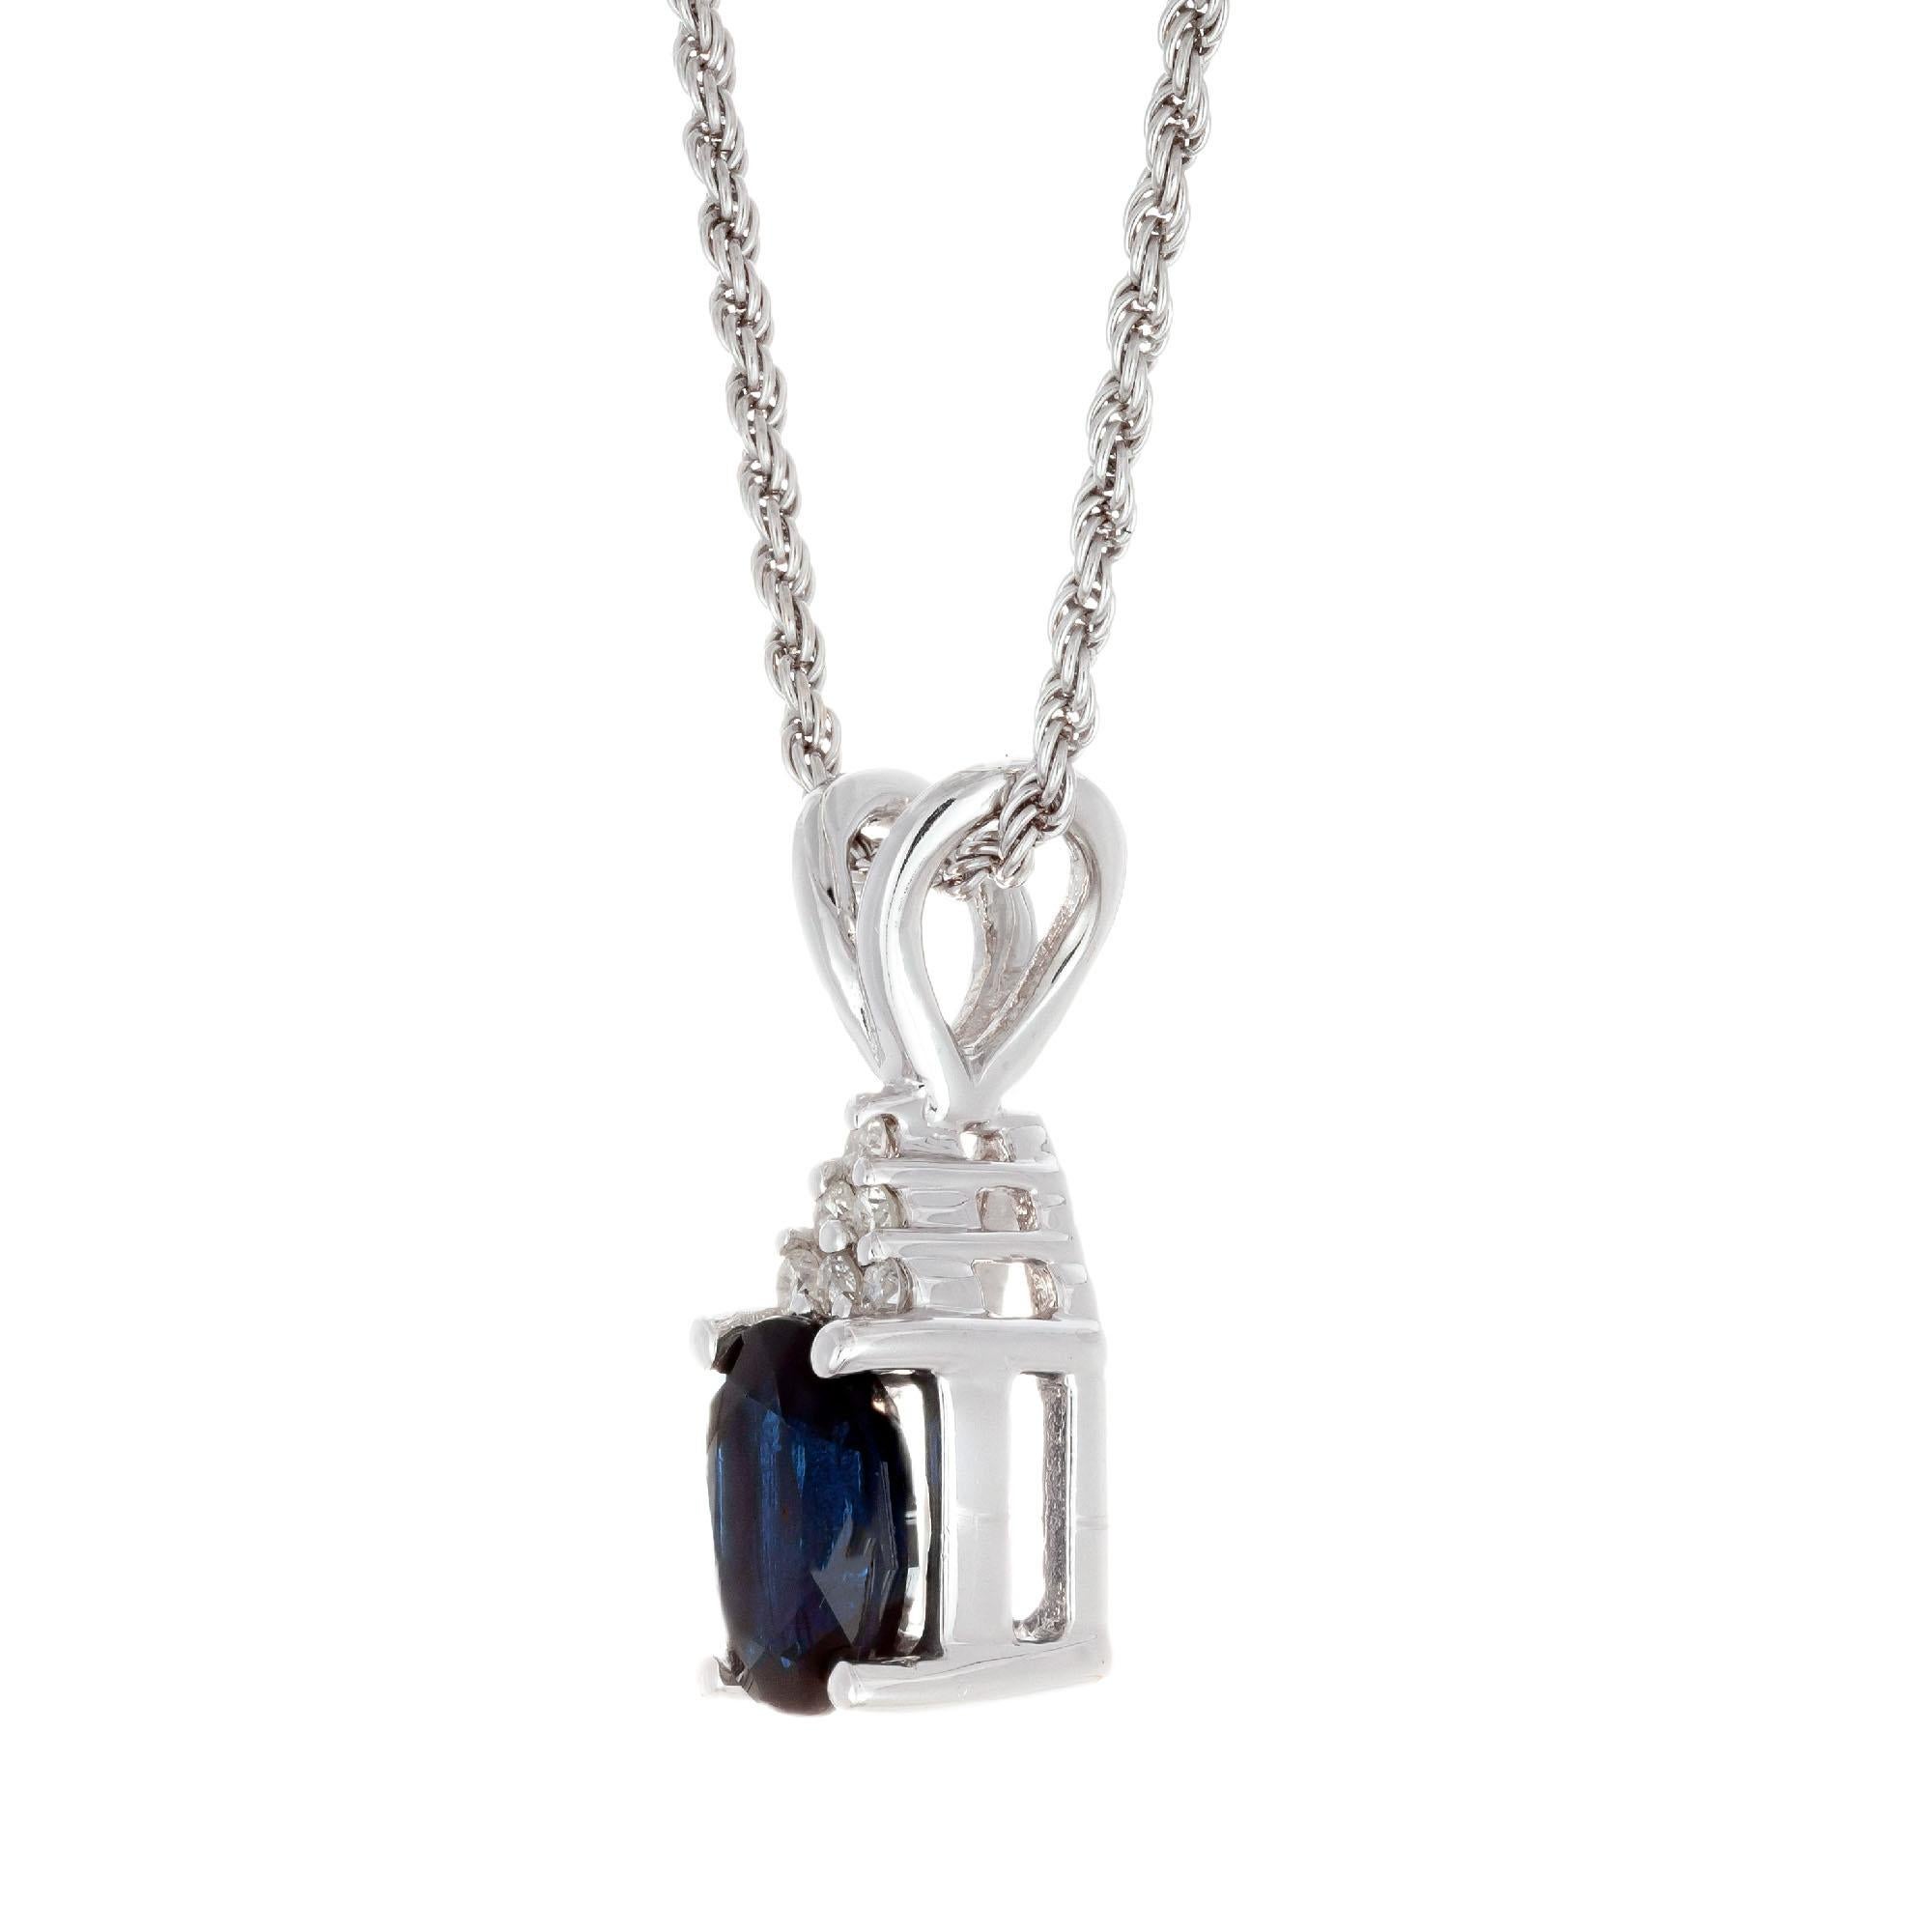 Oval Cut GIA Certified 1.25 Carat Sapphire Diamond White Gold Pendant Necklace For Sale